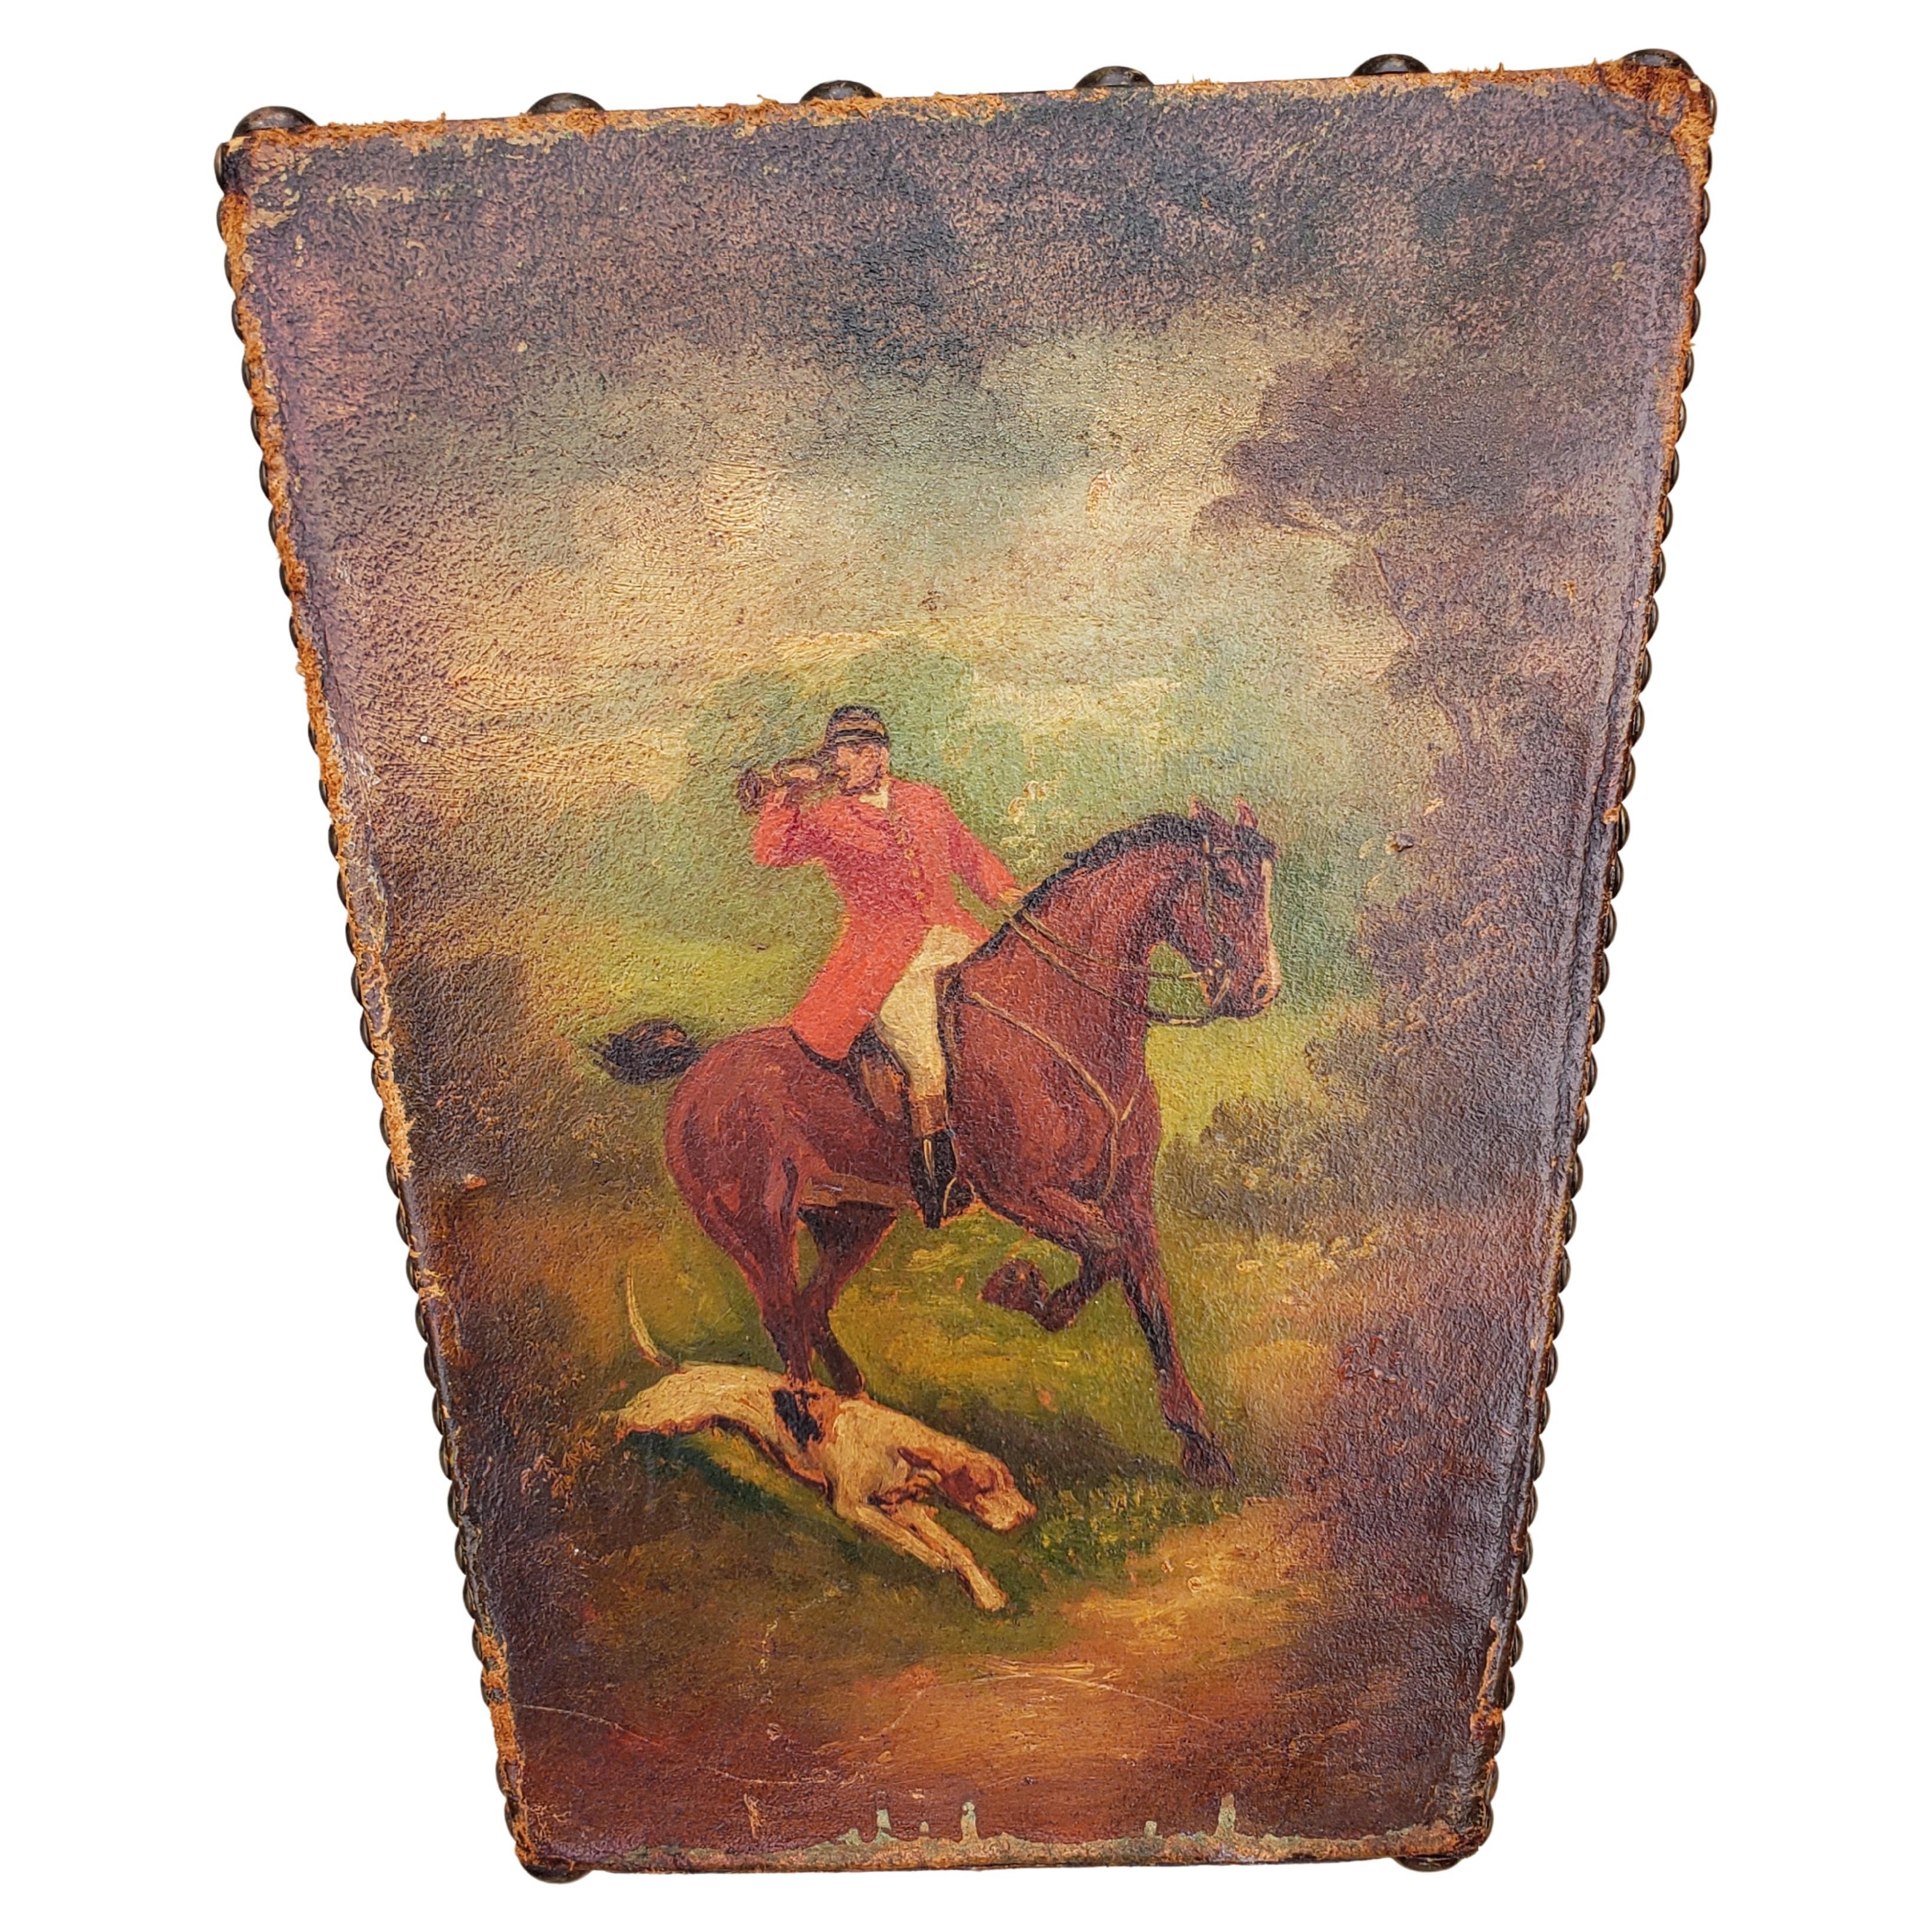 Authentic Cowhide on wood Nailhead top and oil Handpainted throughout. Each of the 4 sides depicts a different scene. Primary used as an executive waste bin and may also be used as a planter. Measures 11